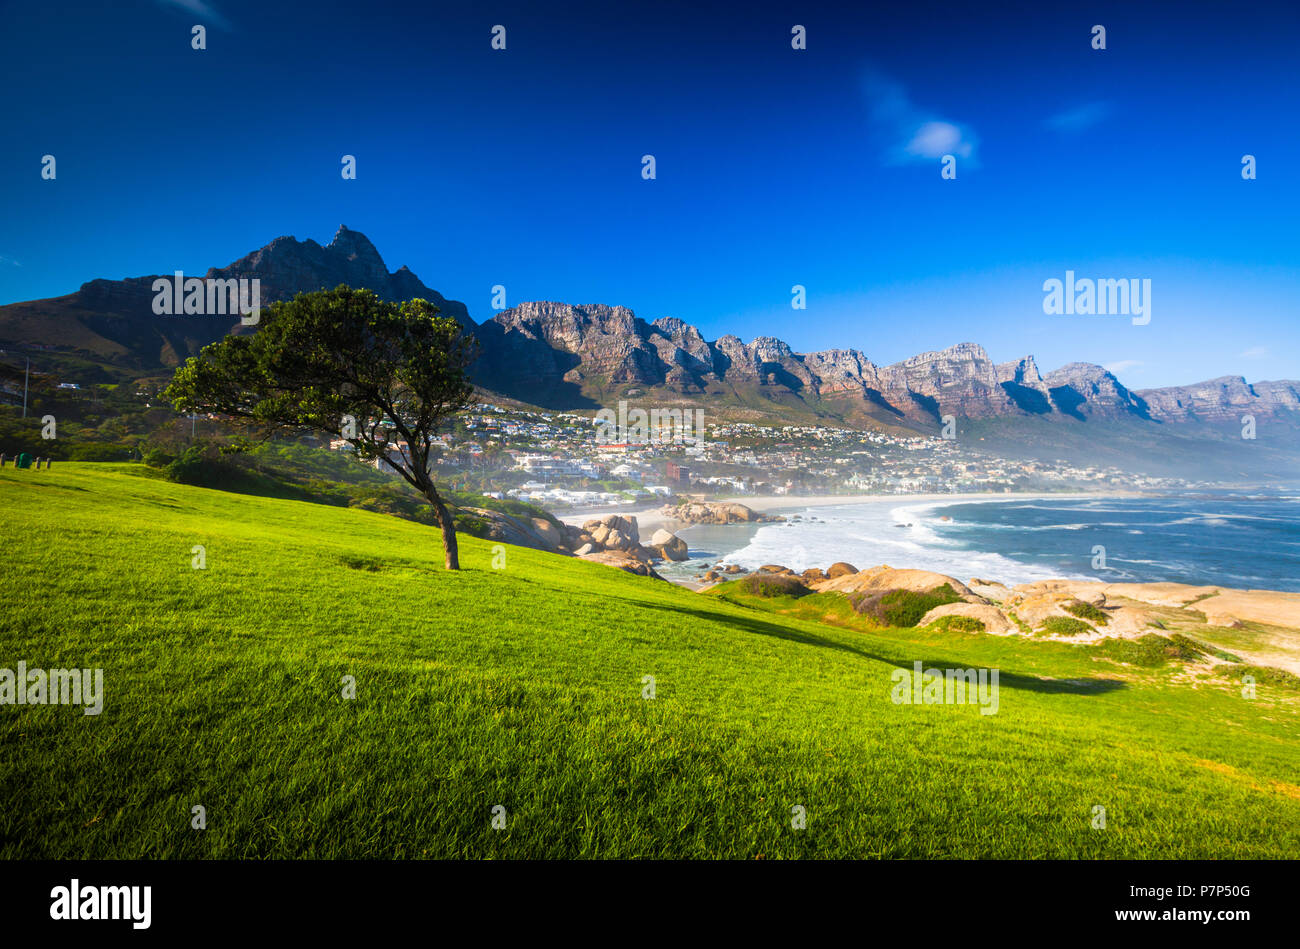 Grass, Tree, and Blue Sky, Camps Bay, South Africa Stock Photo